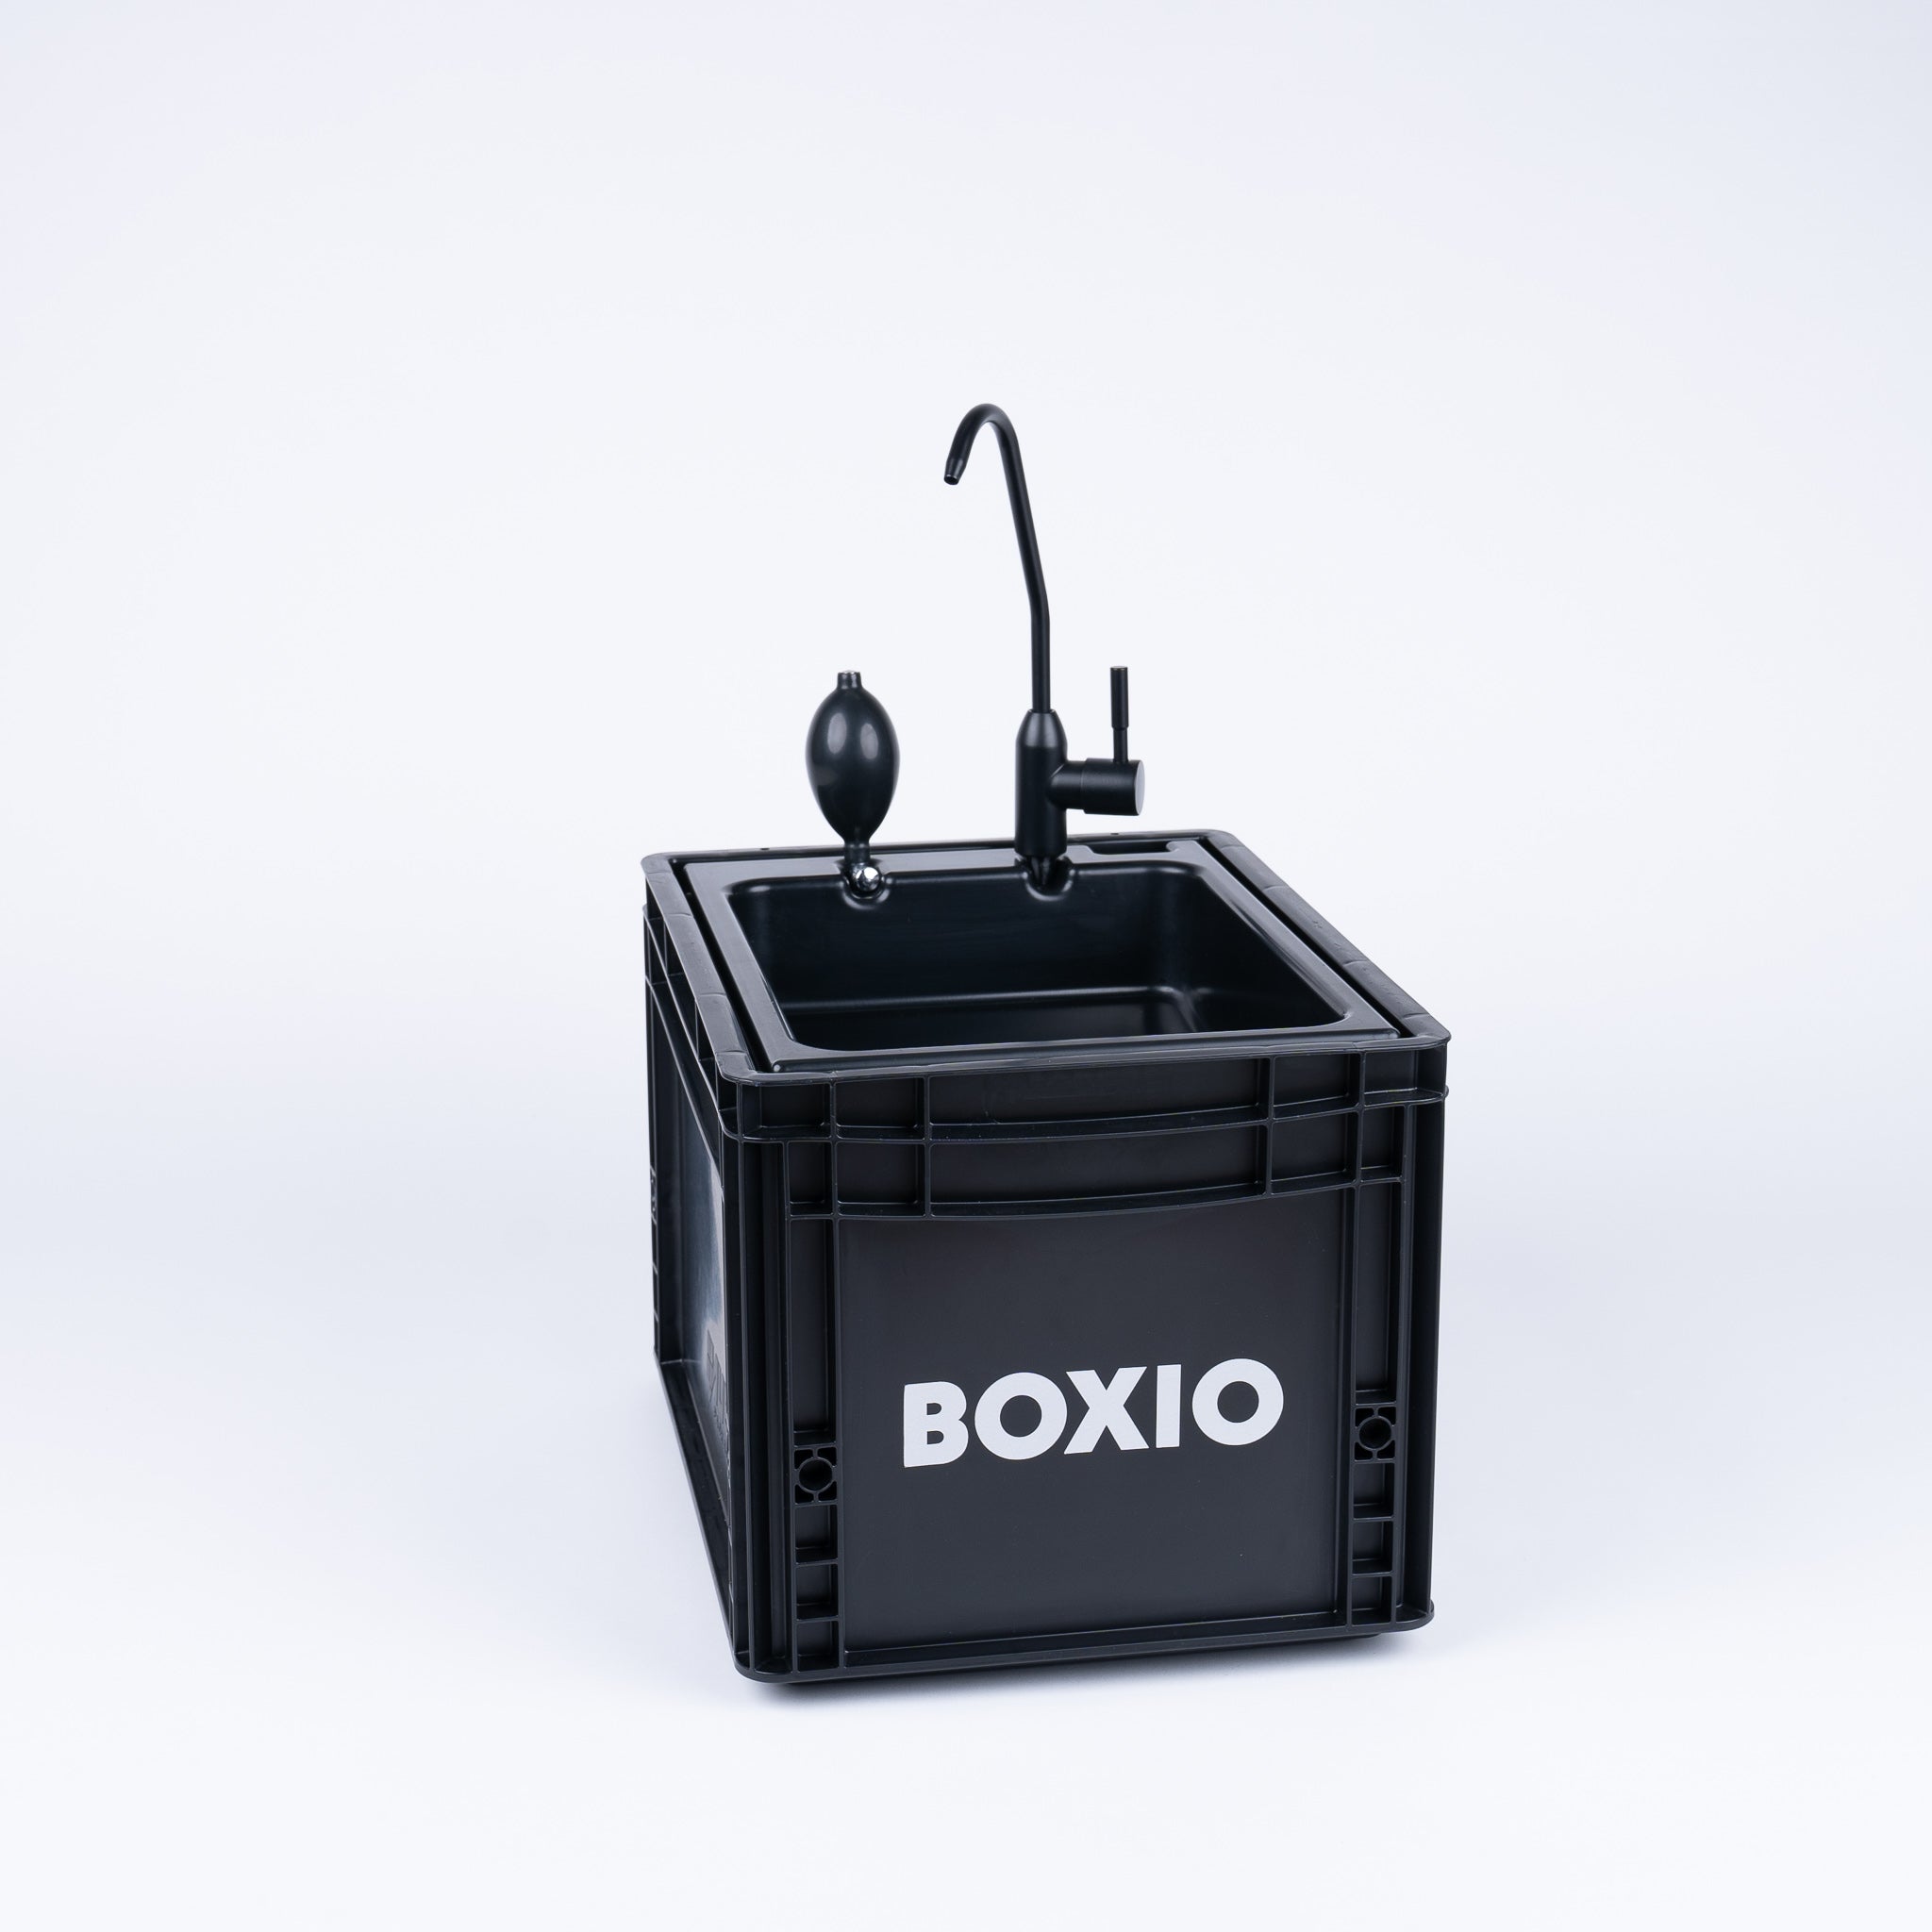 BOXIO SANITARY - Complete set with composting toilet, portable sink and accessories